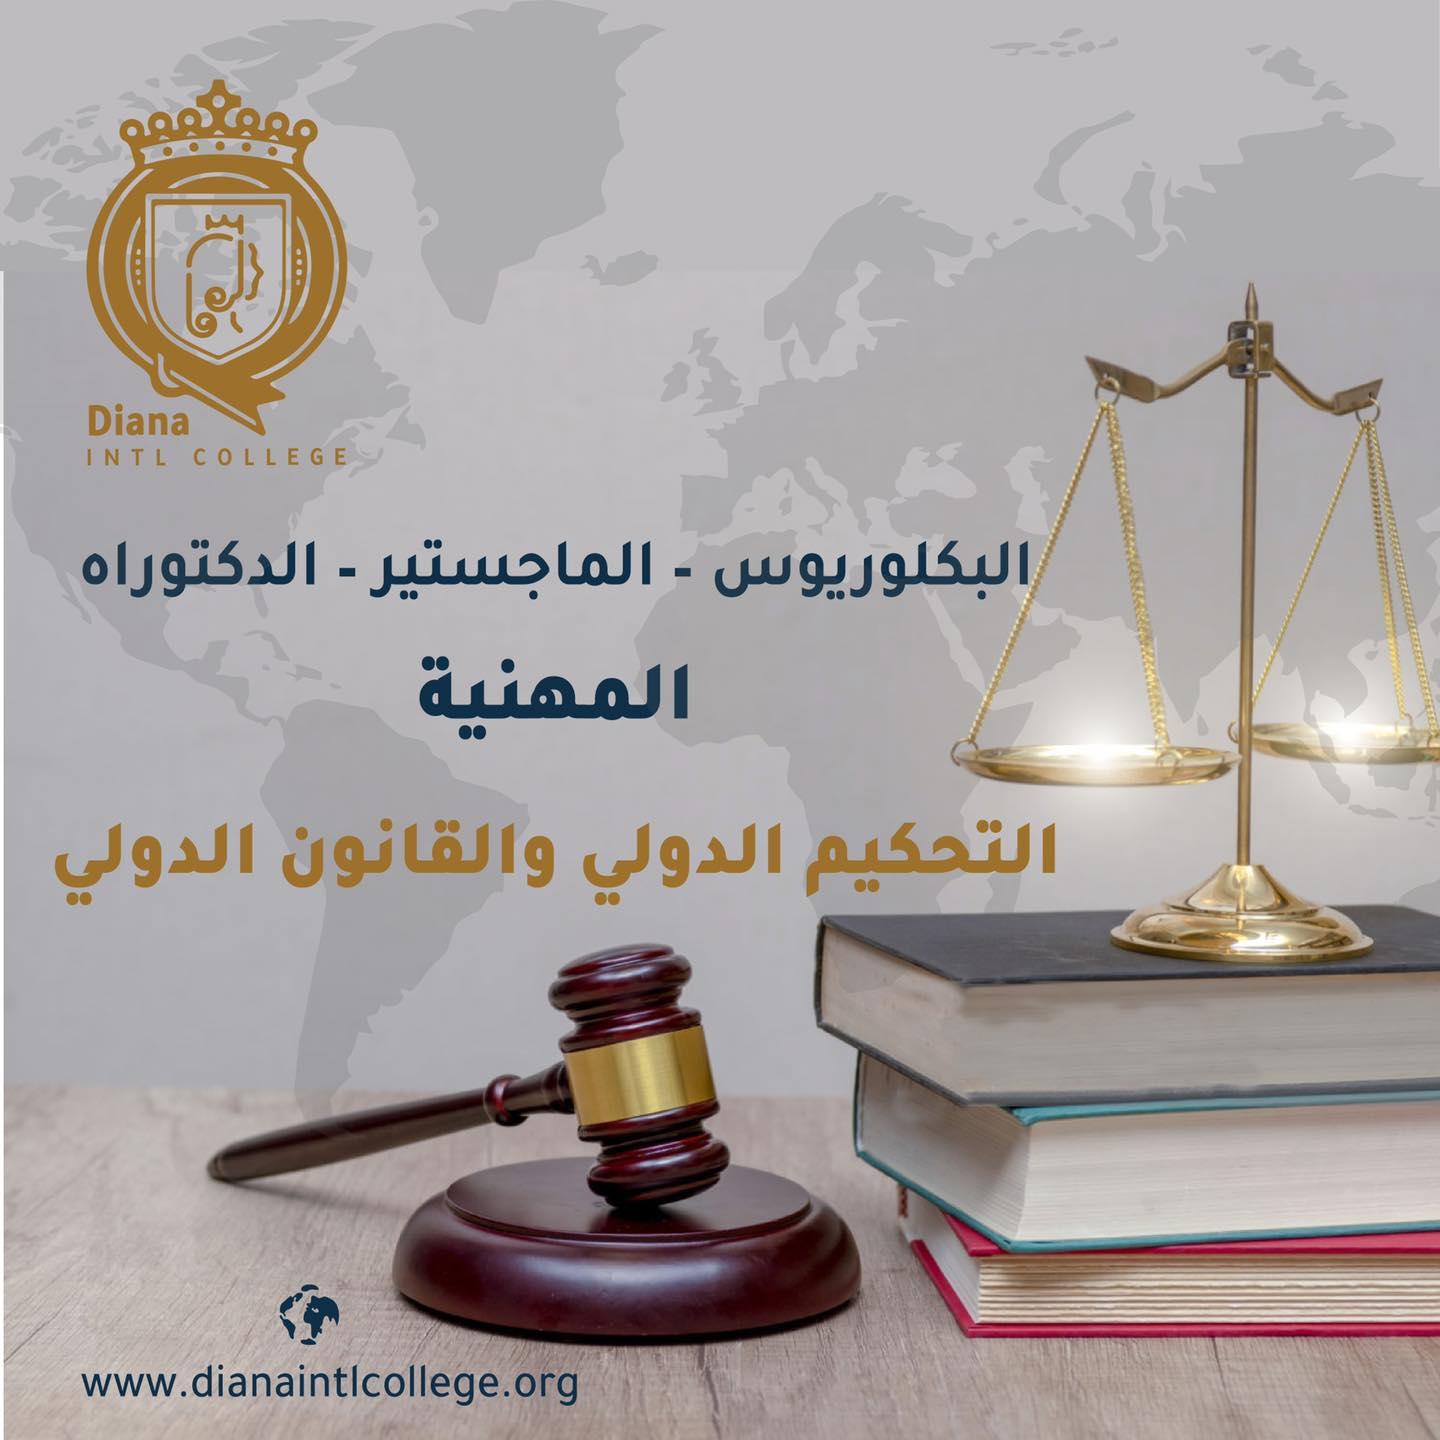 Department of International Arbitration and International Law